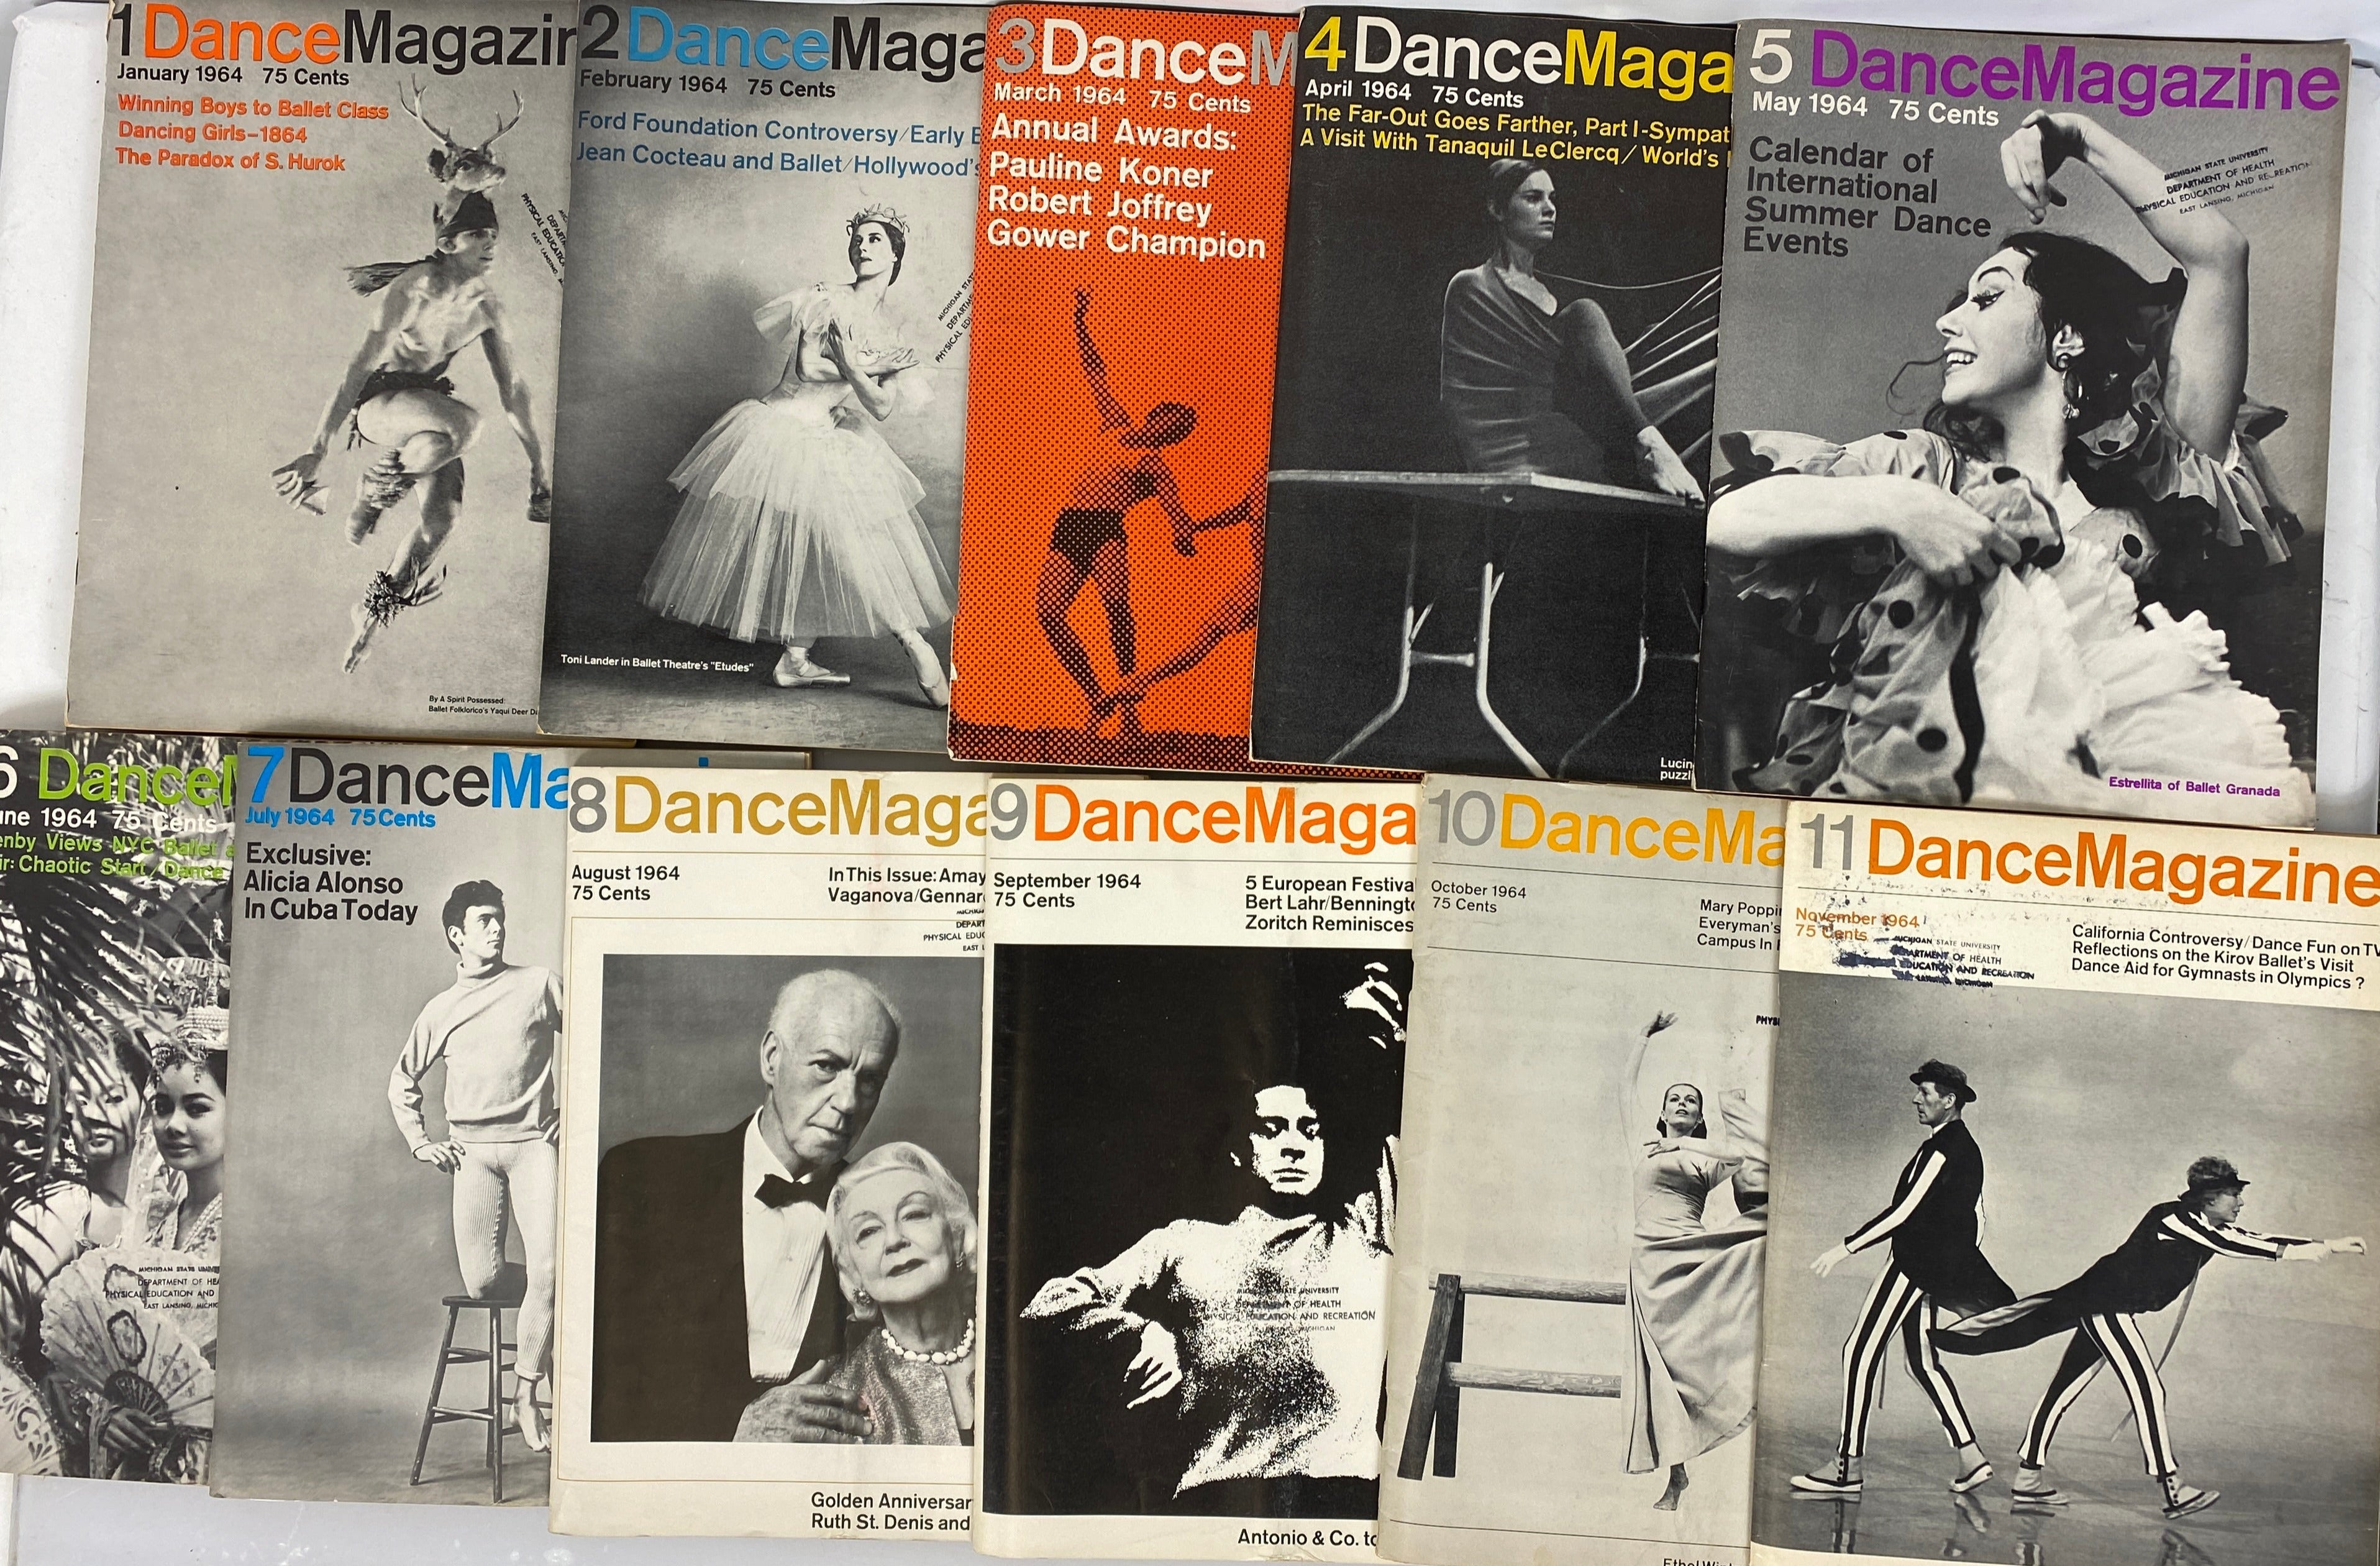 Lot of 11 Vintage The American Dancer Magazines Rare 1964 Issues